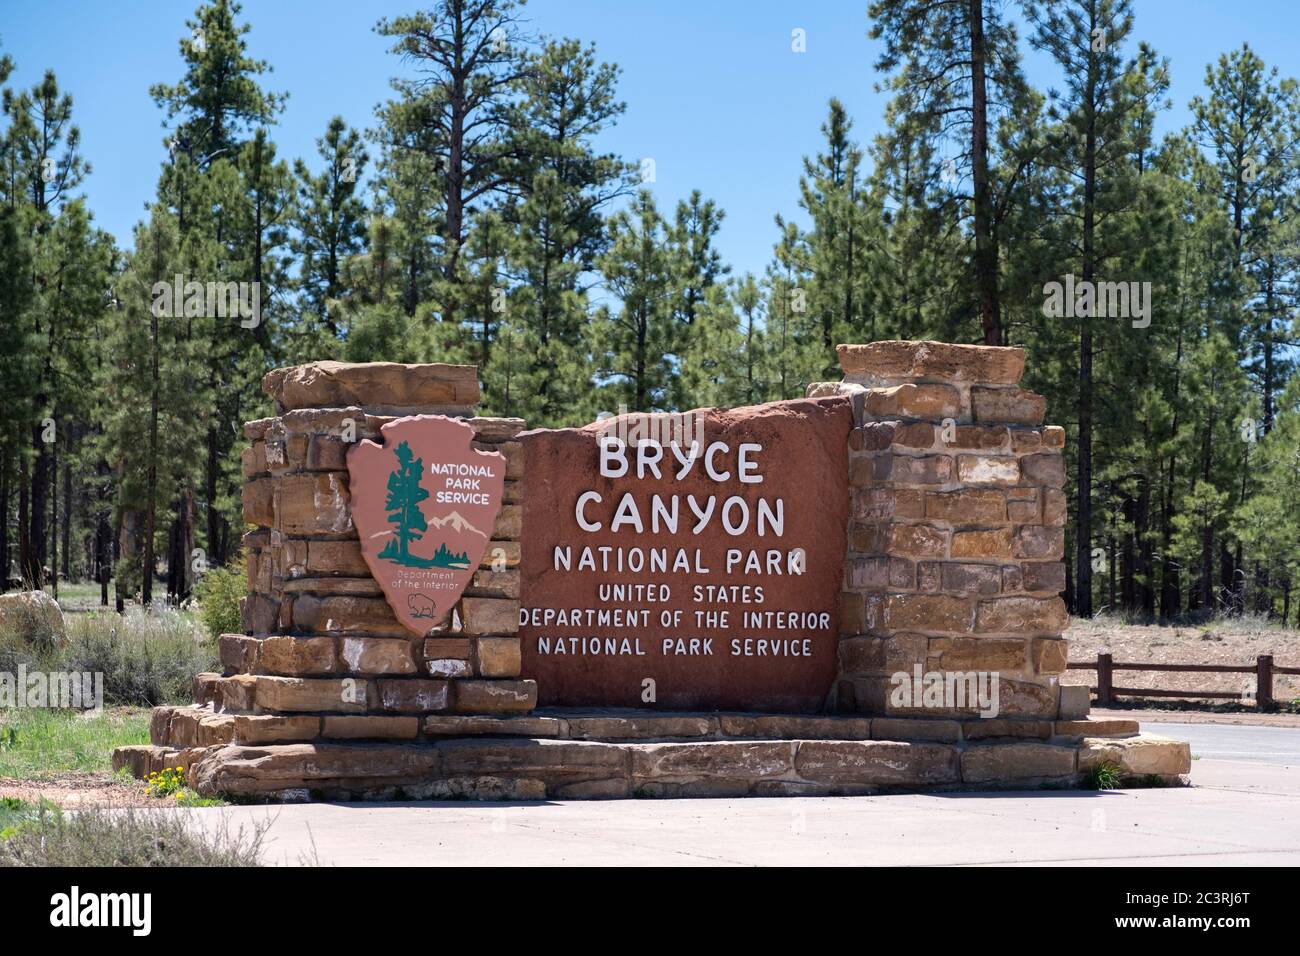 Entrance sign for Bryce Canyon National Park, Utah Stock Photo